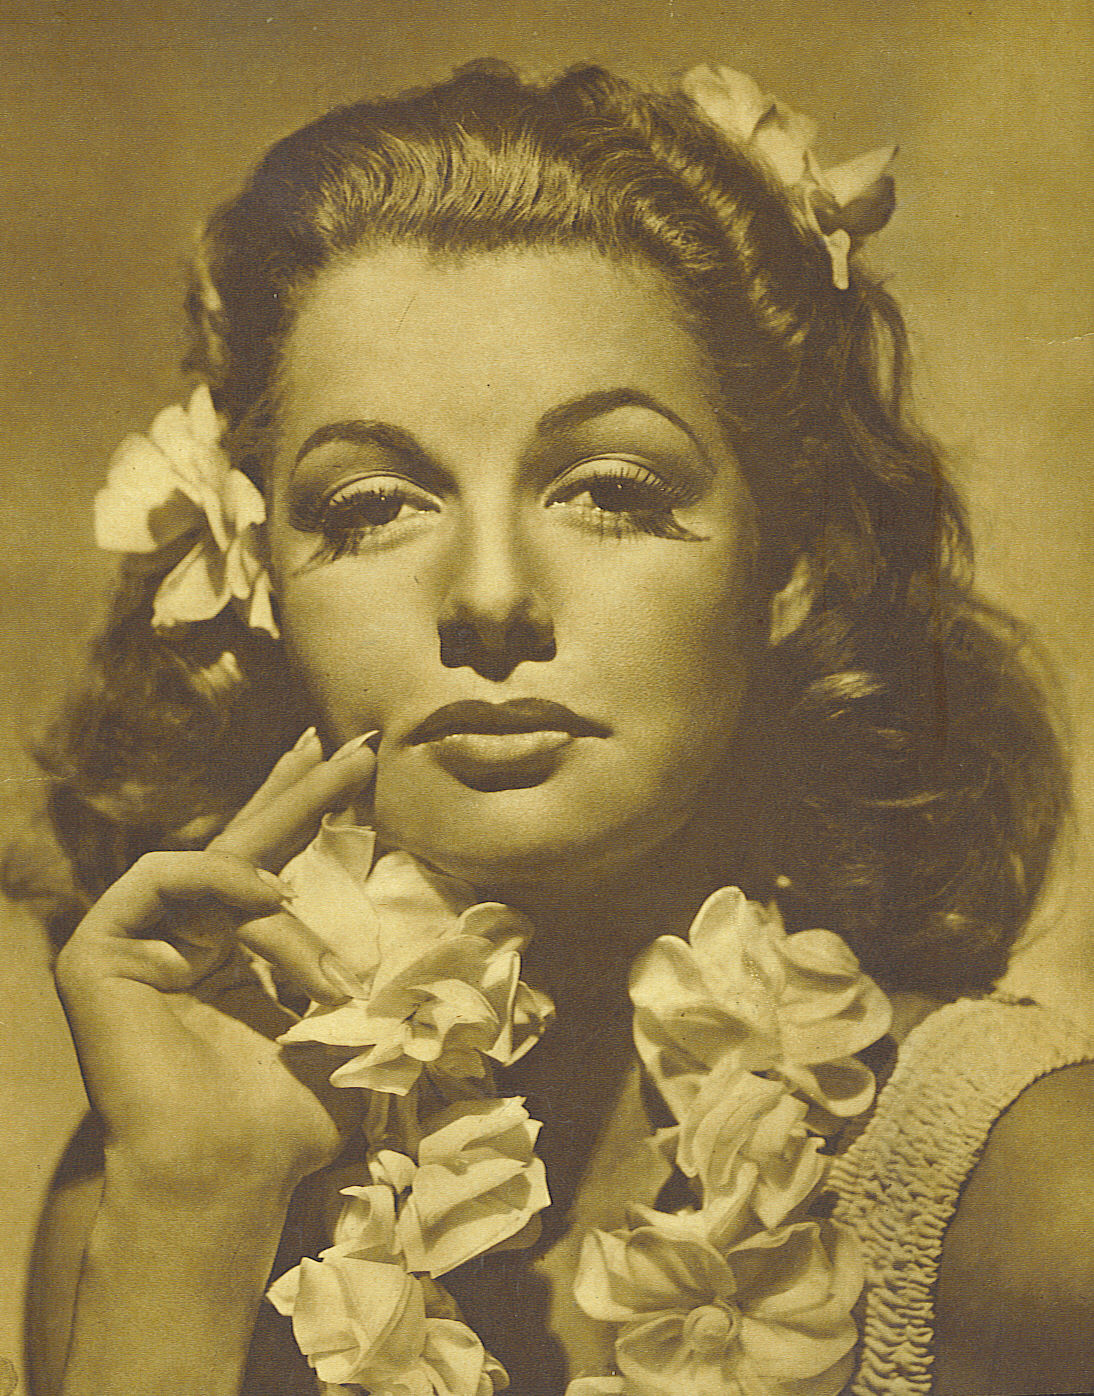 Photo of Ann Sheridan for fans of Classic Movies. ann sheridan, clippings.....